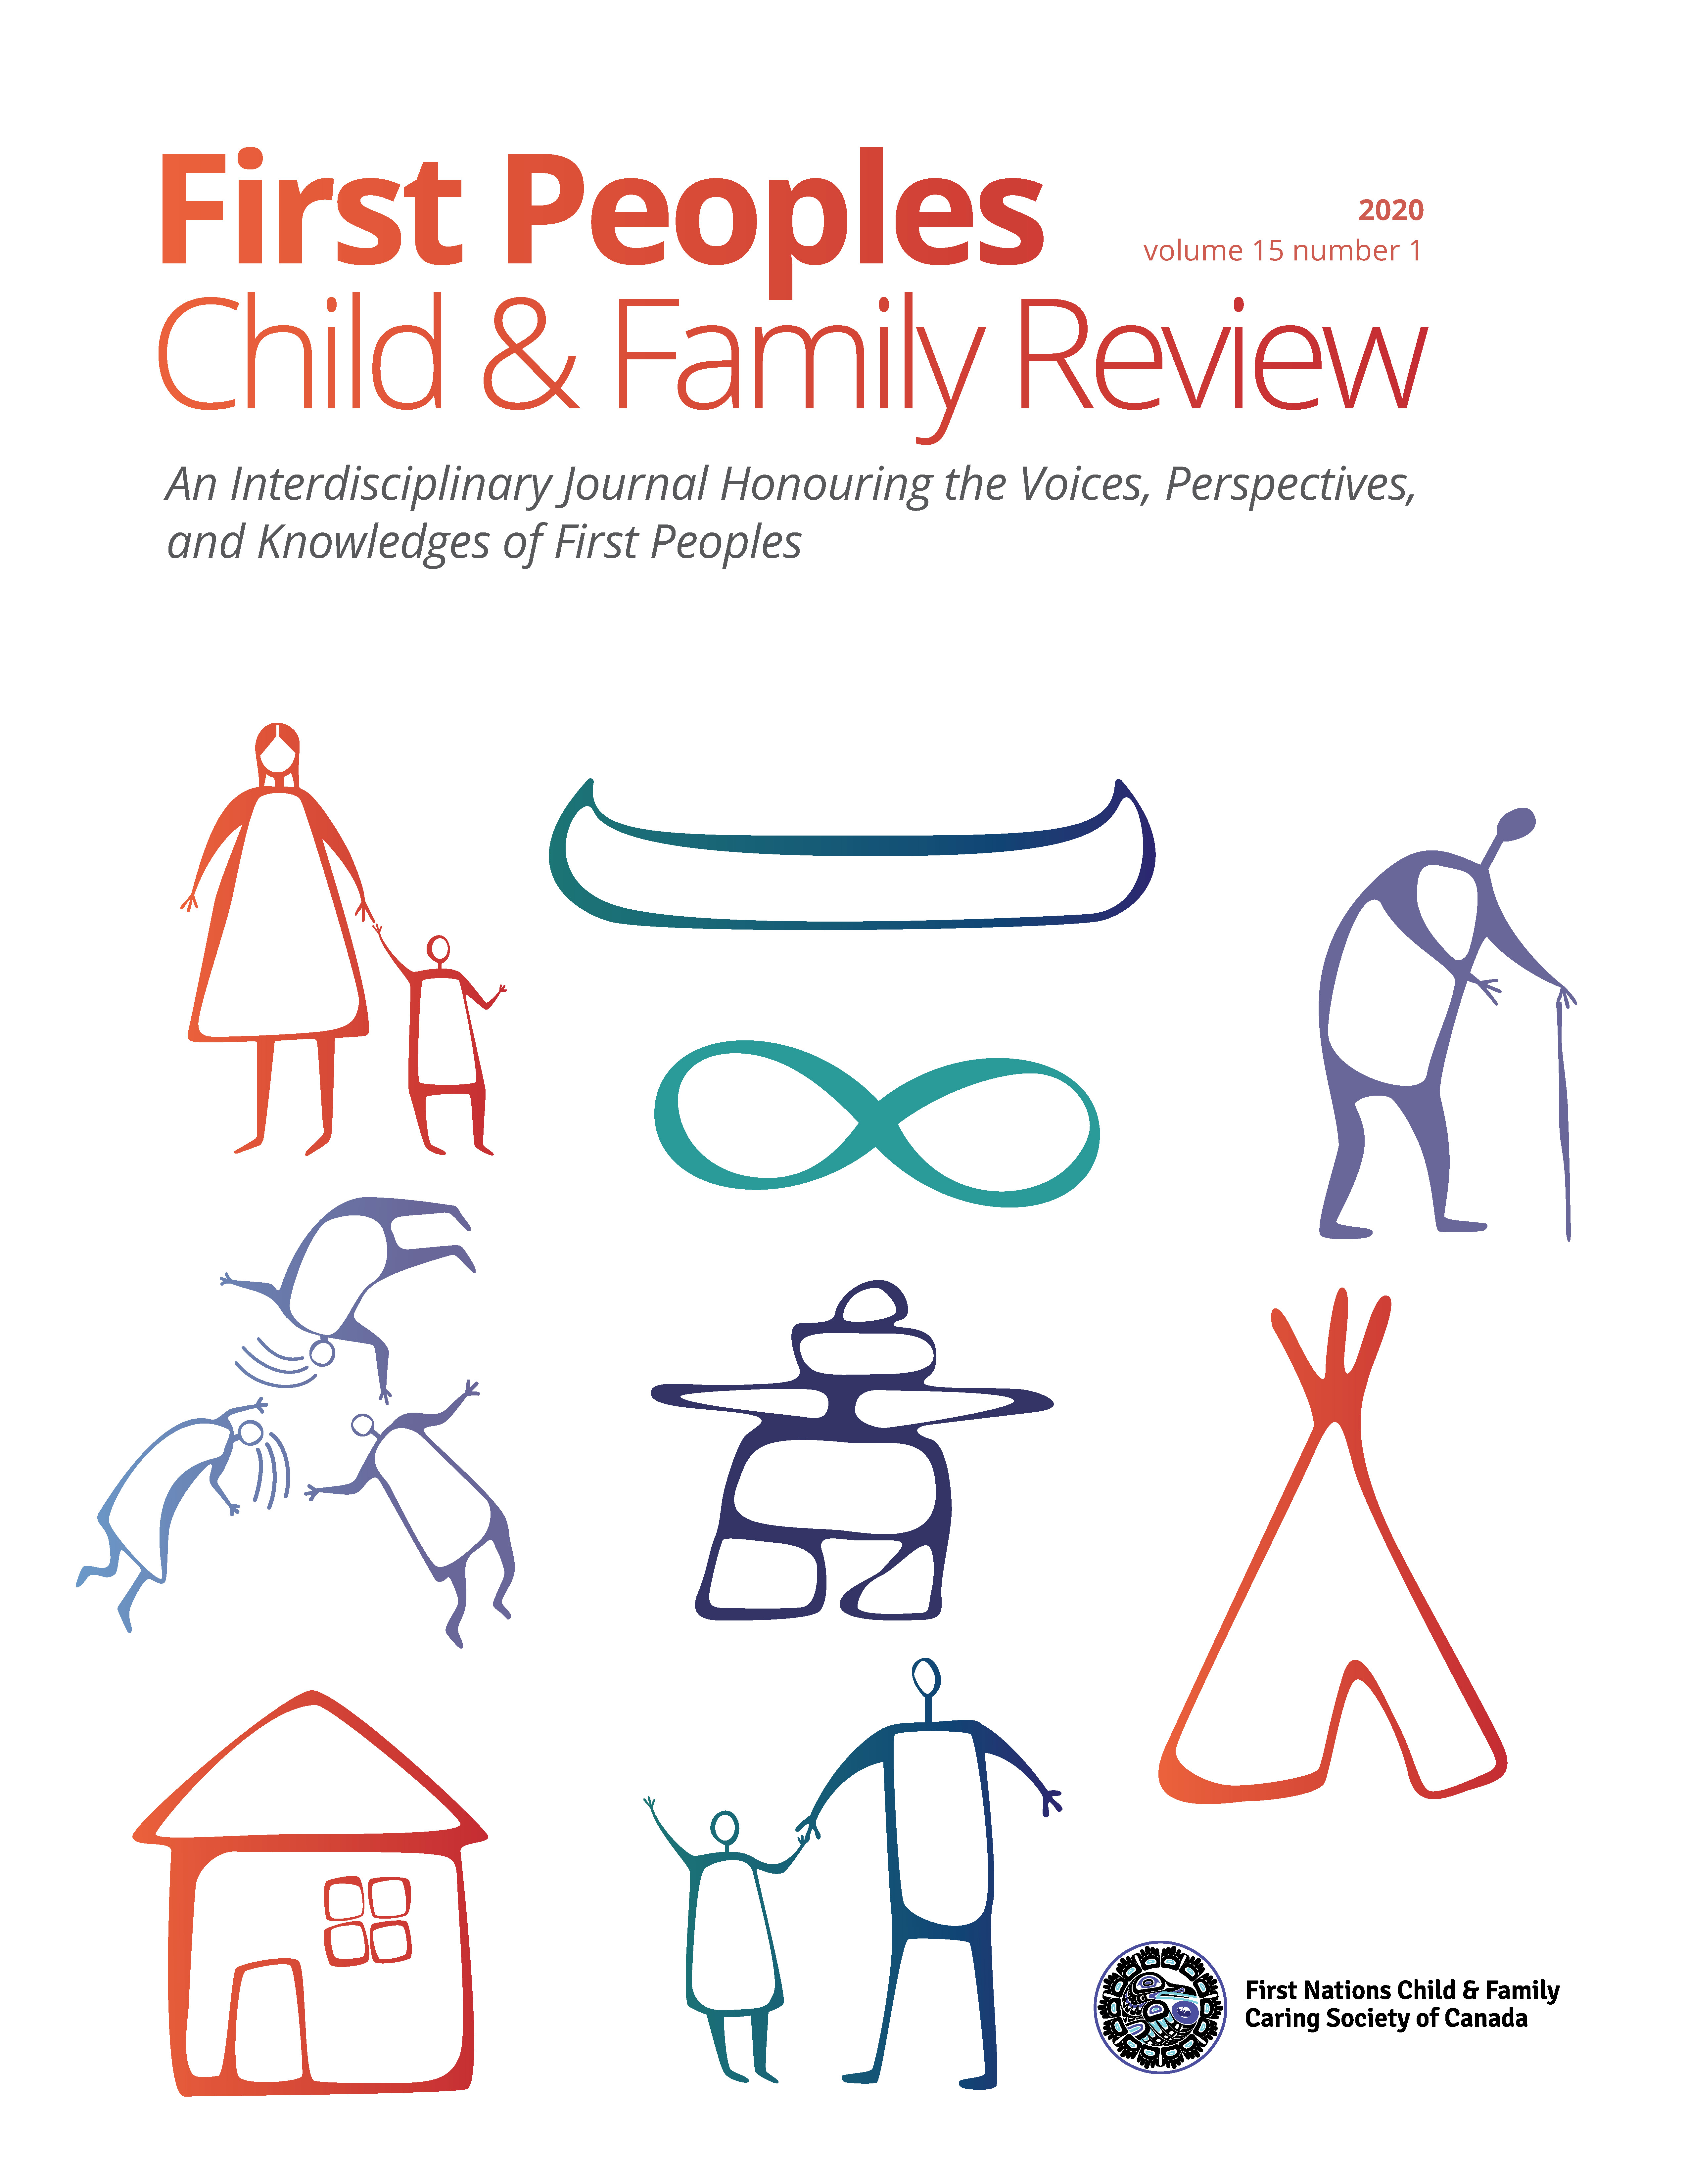 Volume 15, Issue 1 (2020) of the First Peoples Child & Family Review